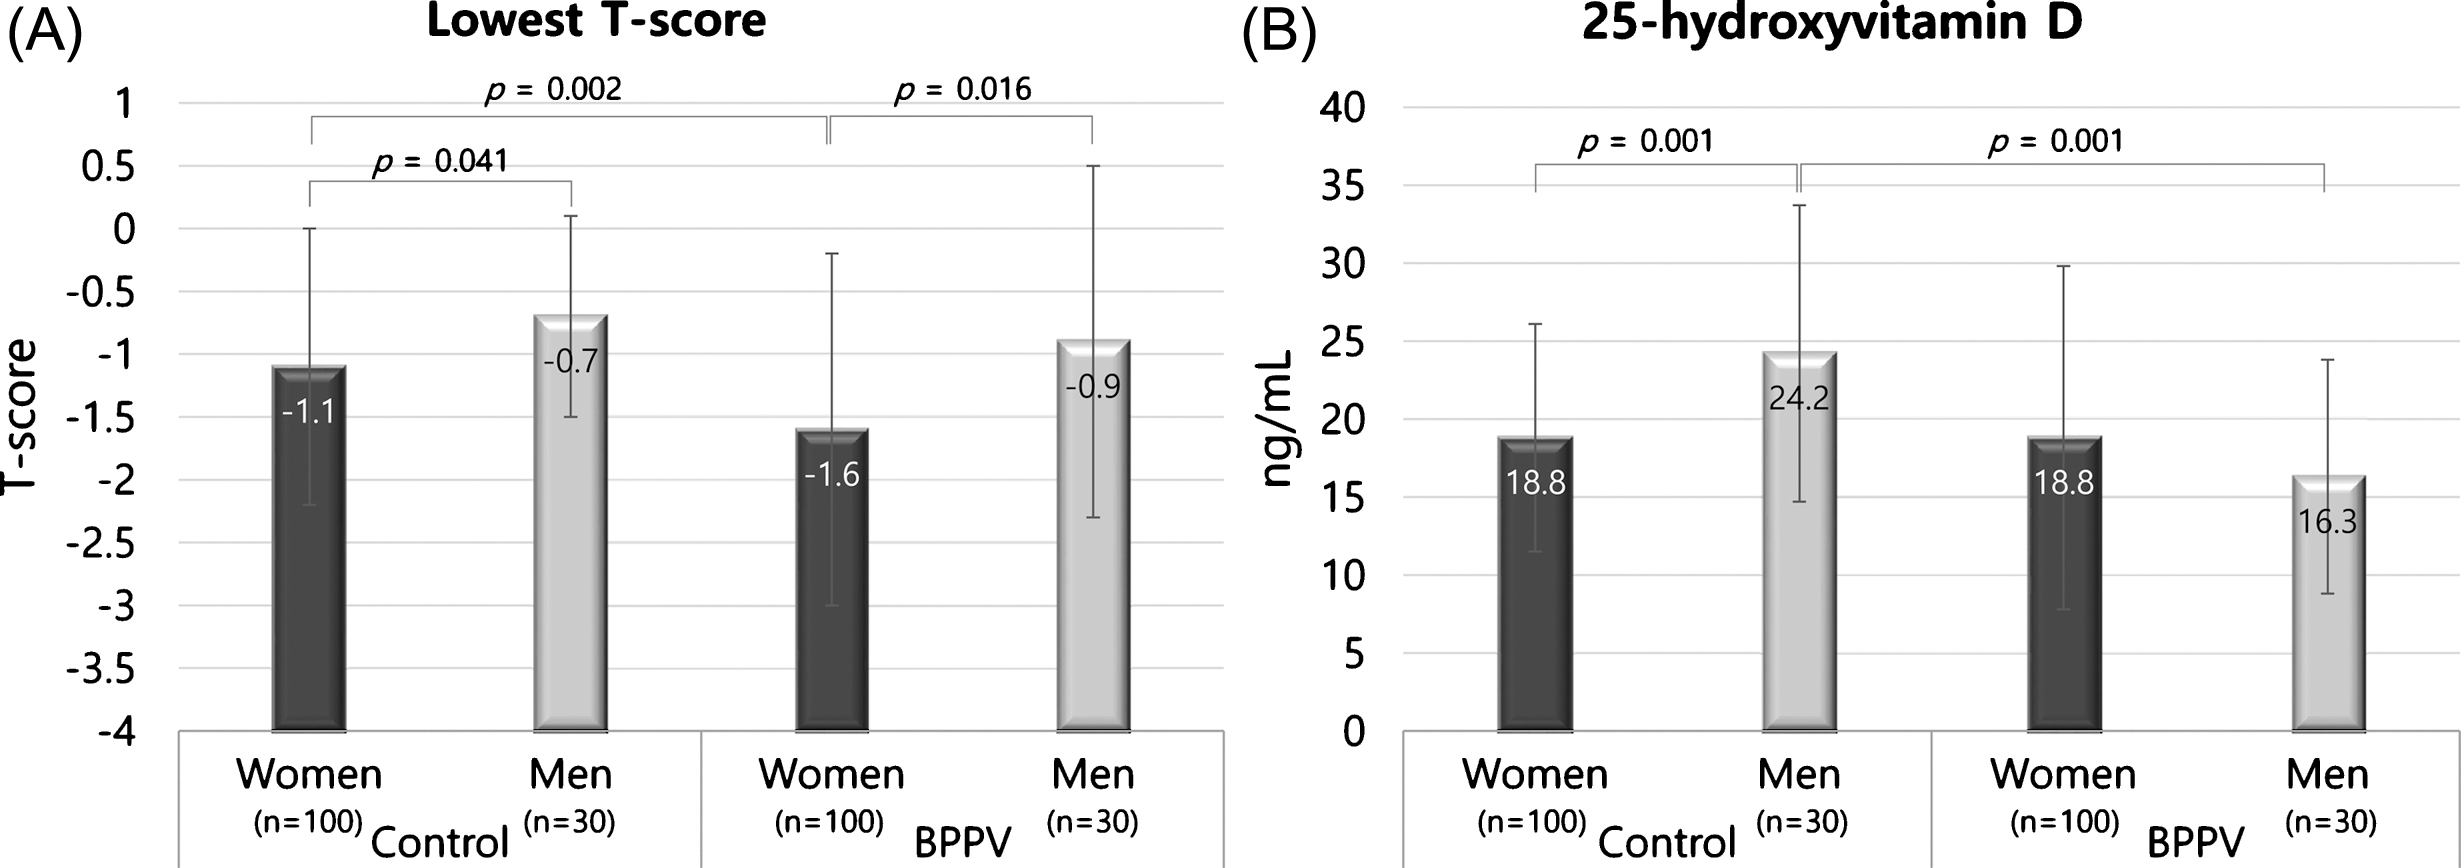 Differences in the lowest T-score and serum 25-hydroxyvitamin D concentrations between women and men in BPPV and control groups. The T-scores of women were significantly lower than men in both the BPPV and control groups (A). In the control group, the mean serum 25-hydroxyvitamin D concentration was significantly higher in men compared with women (B). The error bar indicates one standard deviation from the mean.